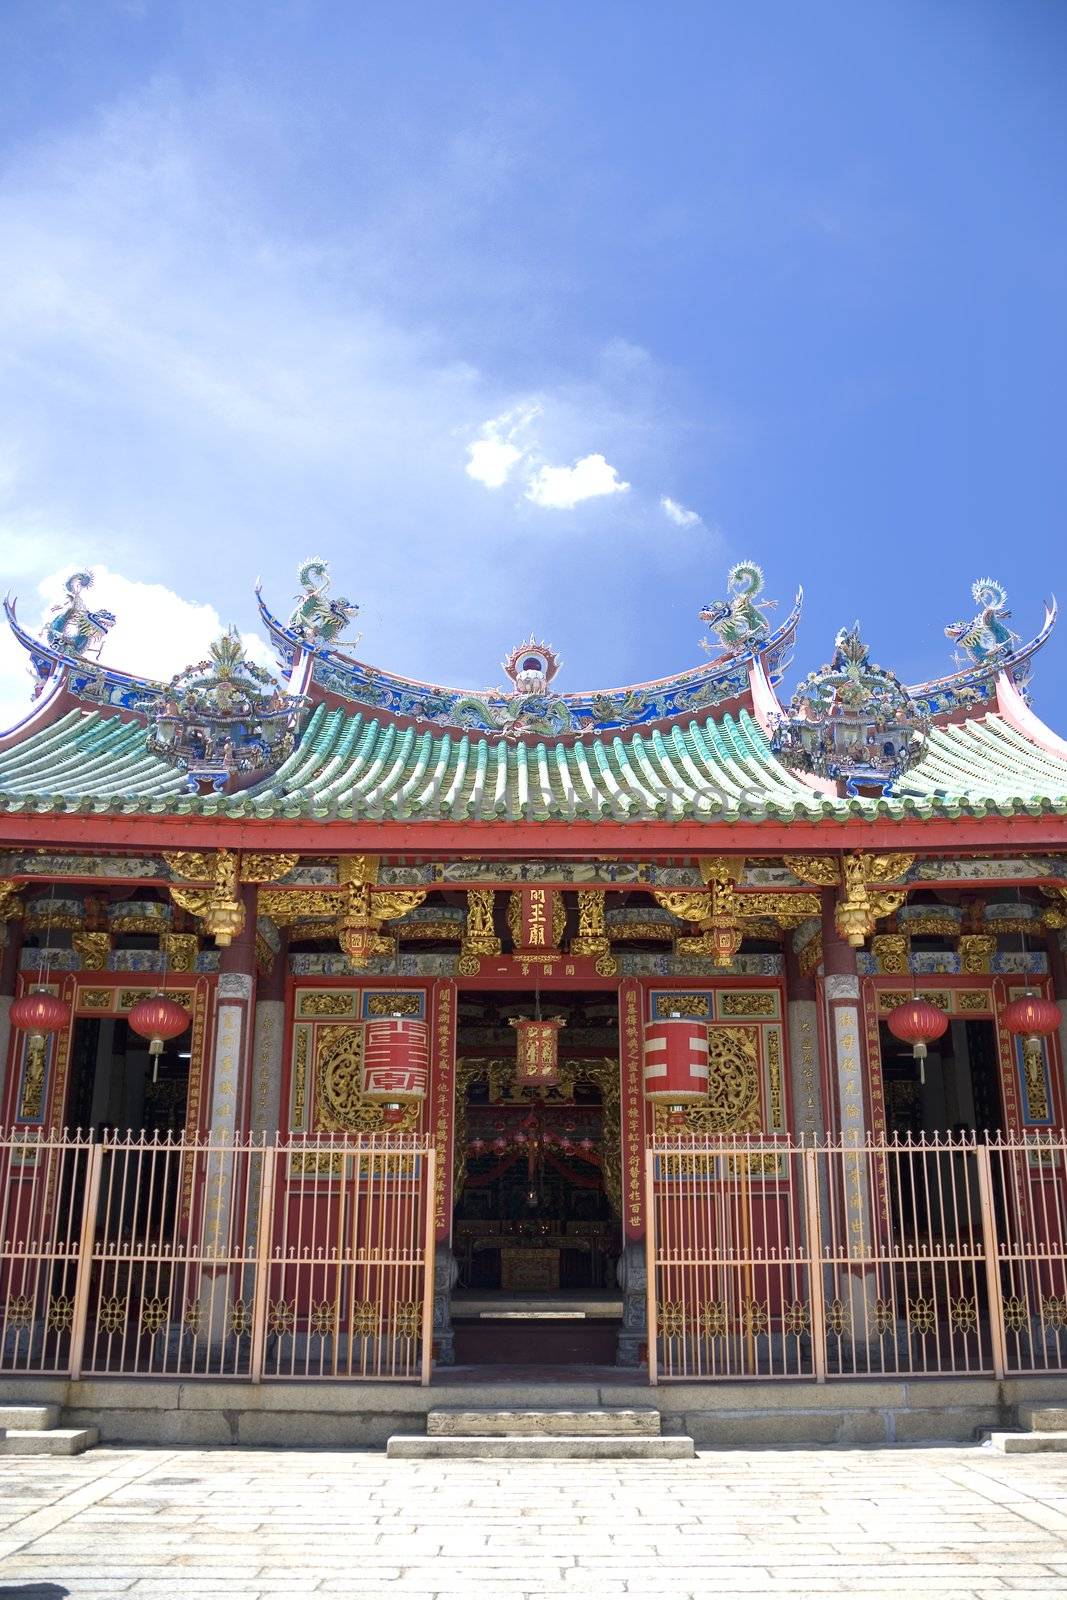 Image of a Chinese temple in Malaysia.